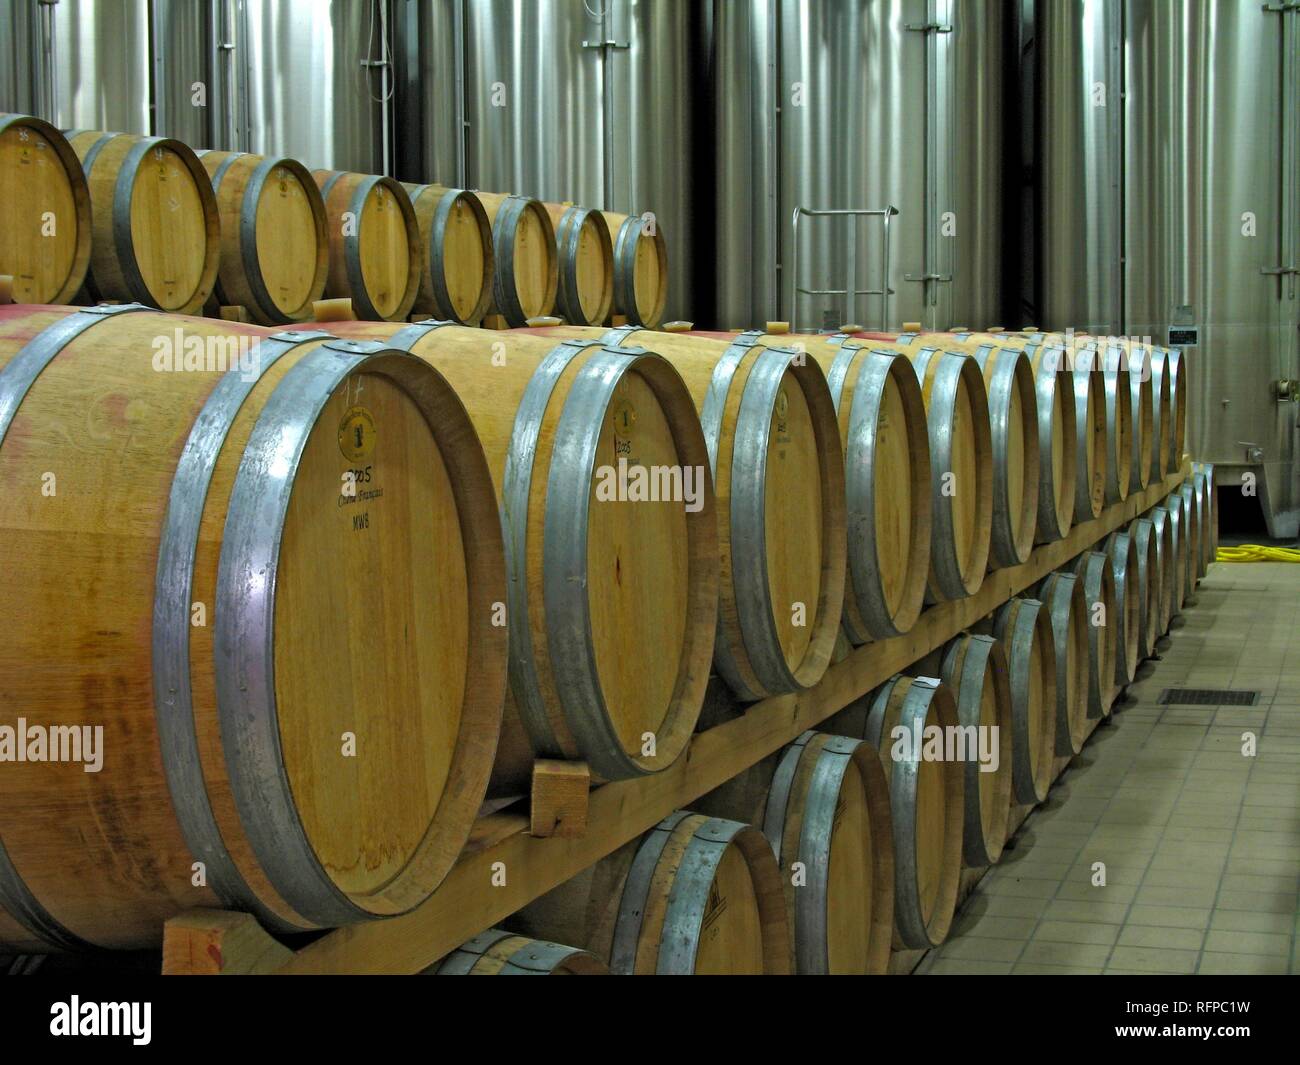 Wine cellar with wooden barrels and stainless steel containers Stock Photo